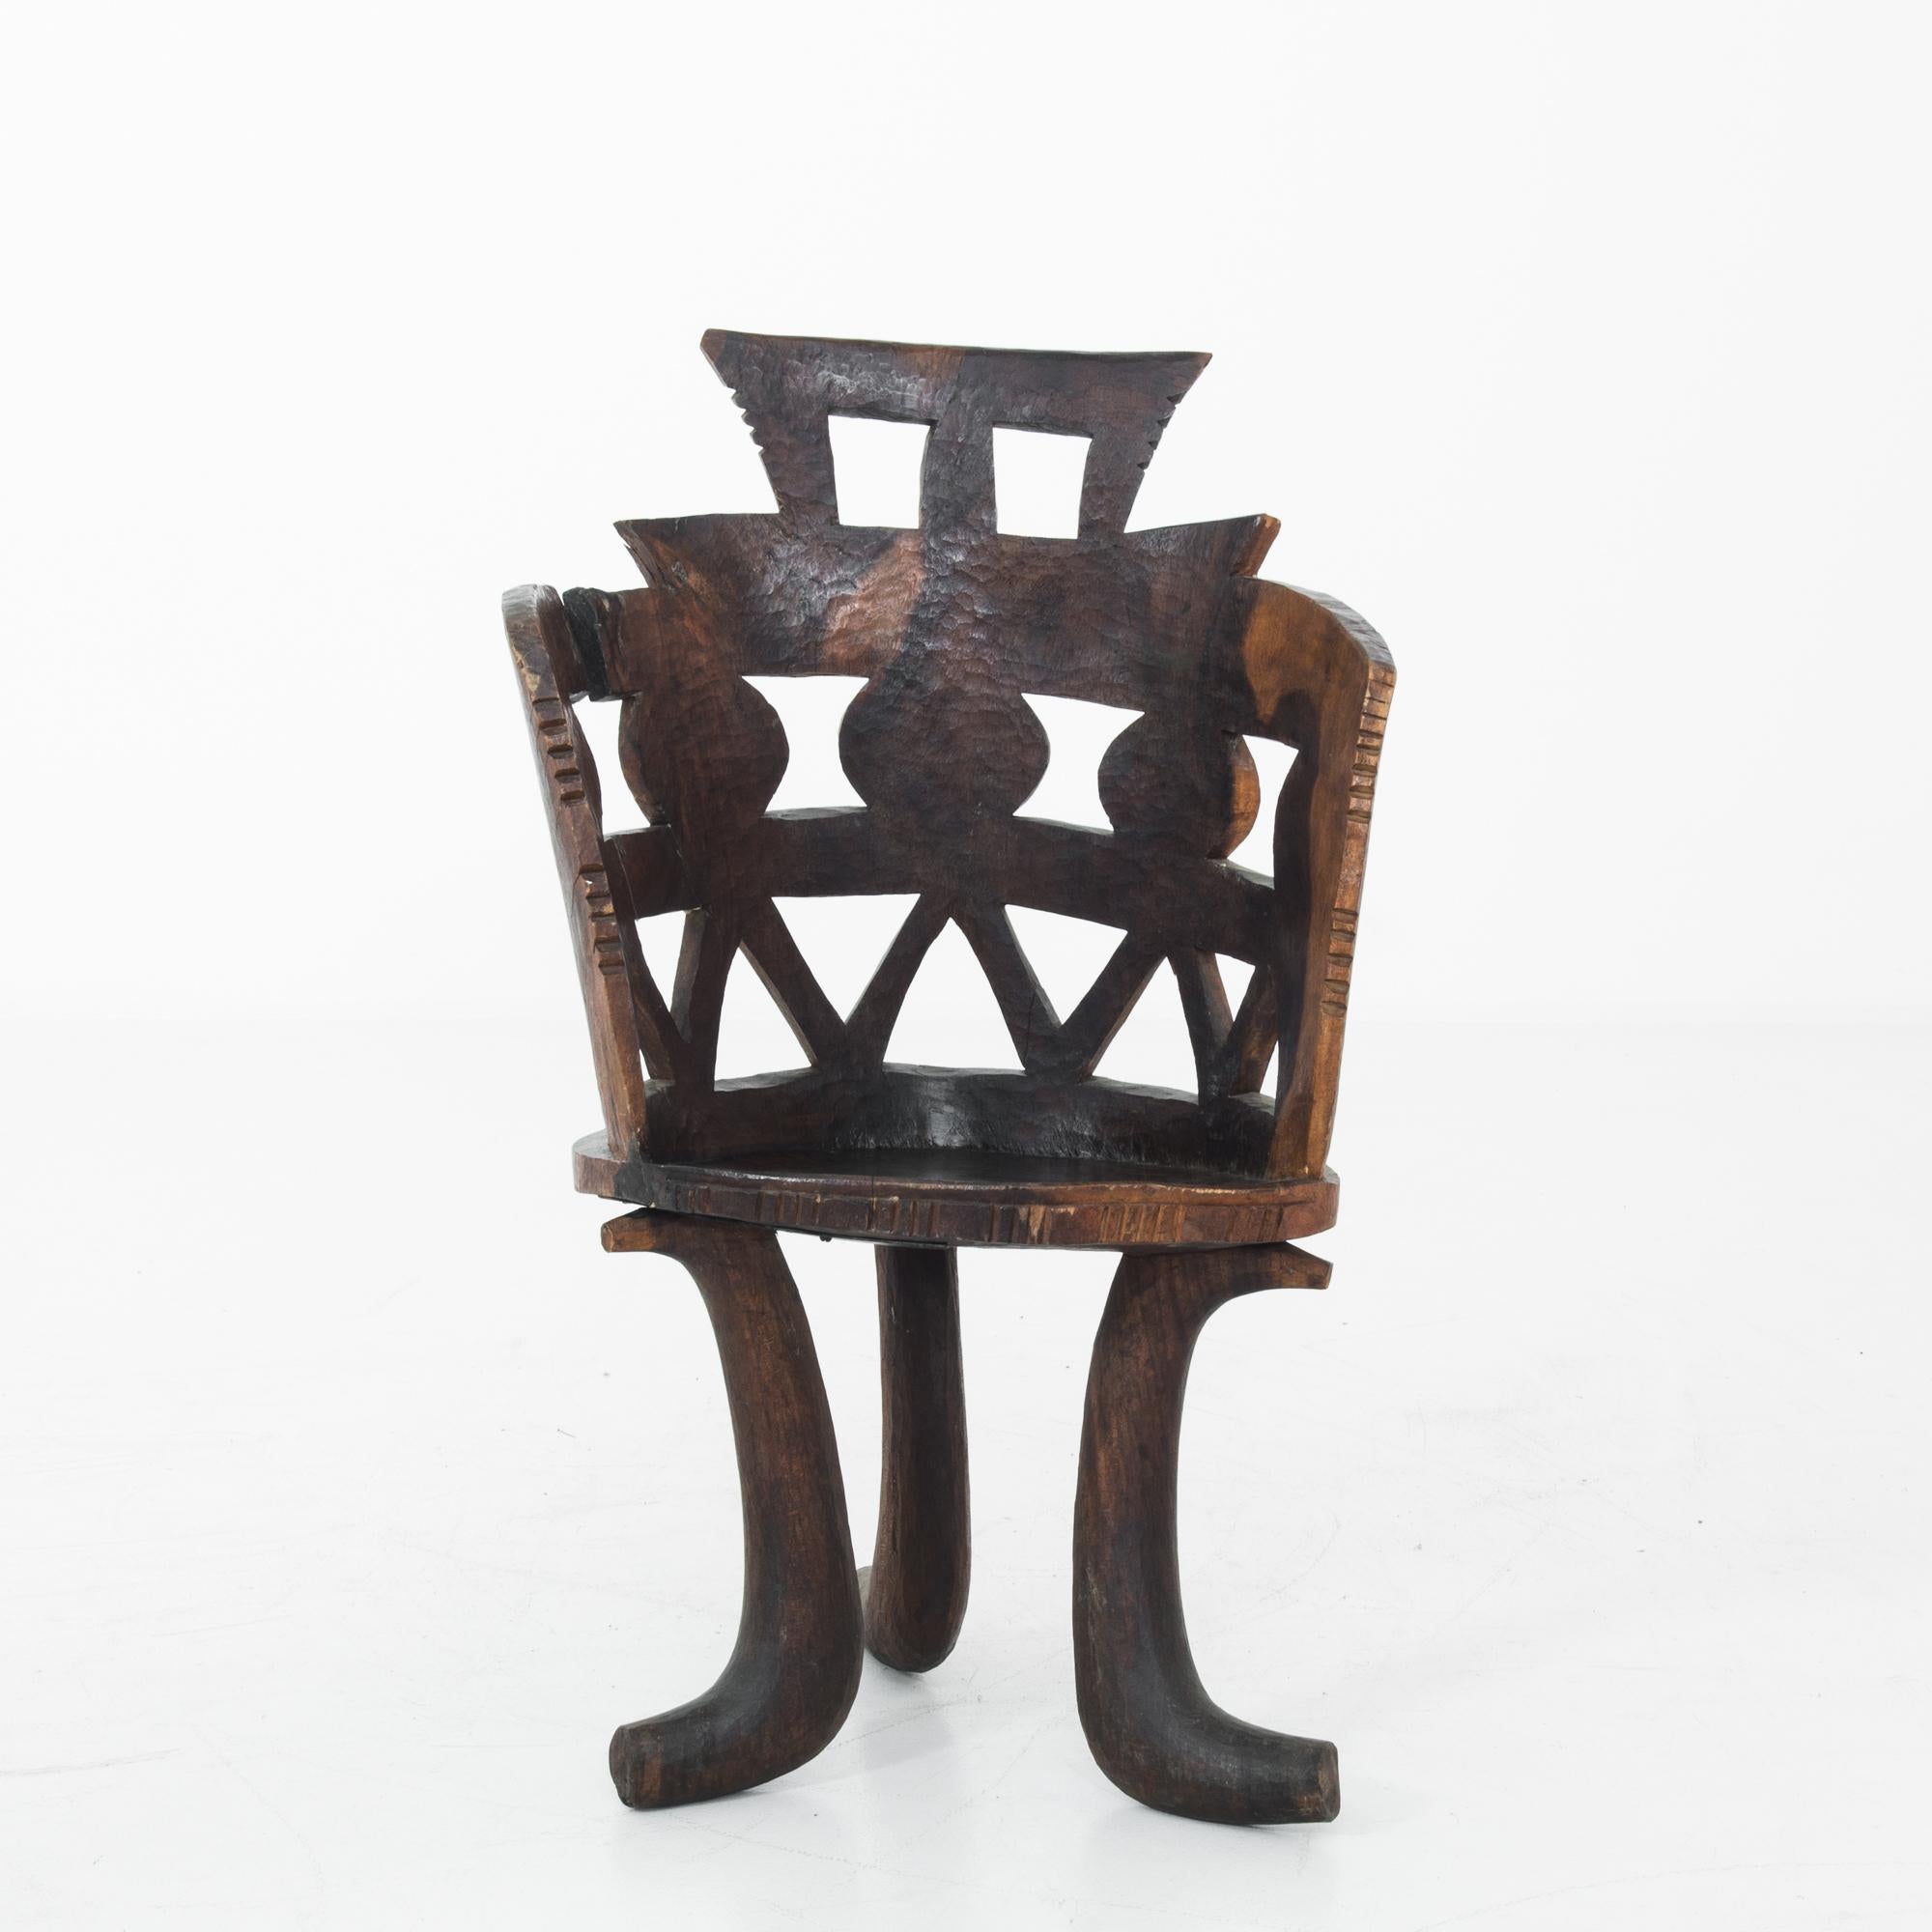 A wooden armchair from the African continent, produced circa 1950. Things may fall apart, but this hand carved chair was built to last. Standing on three legs that curve like elephant tusks, the seat back is an image of unity: depicting people